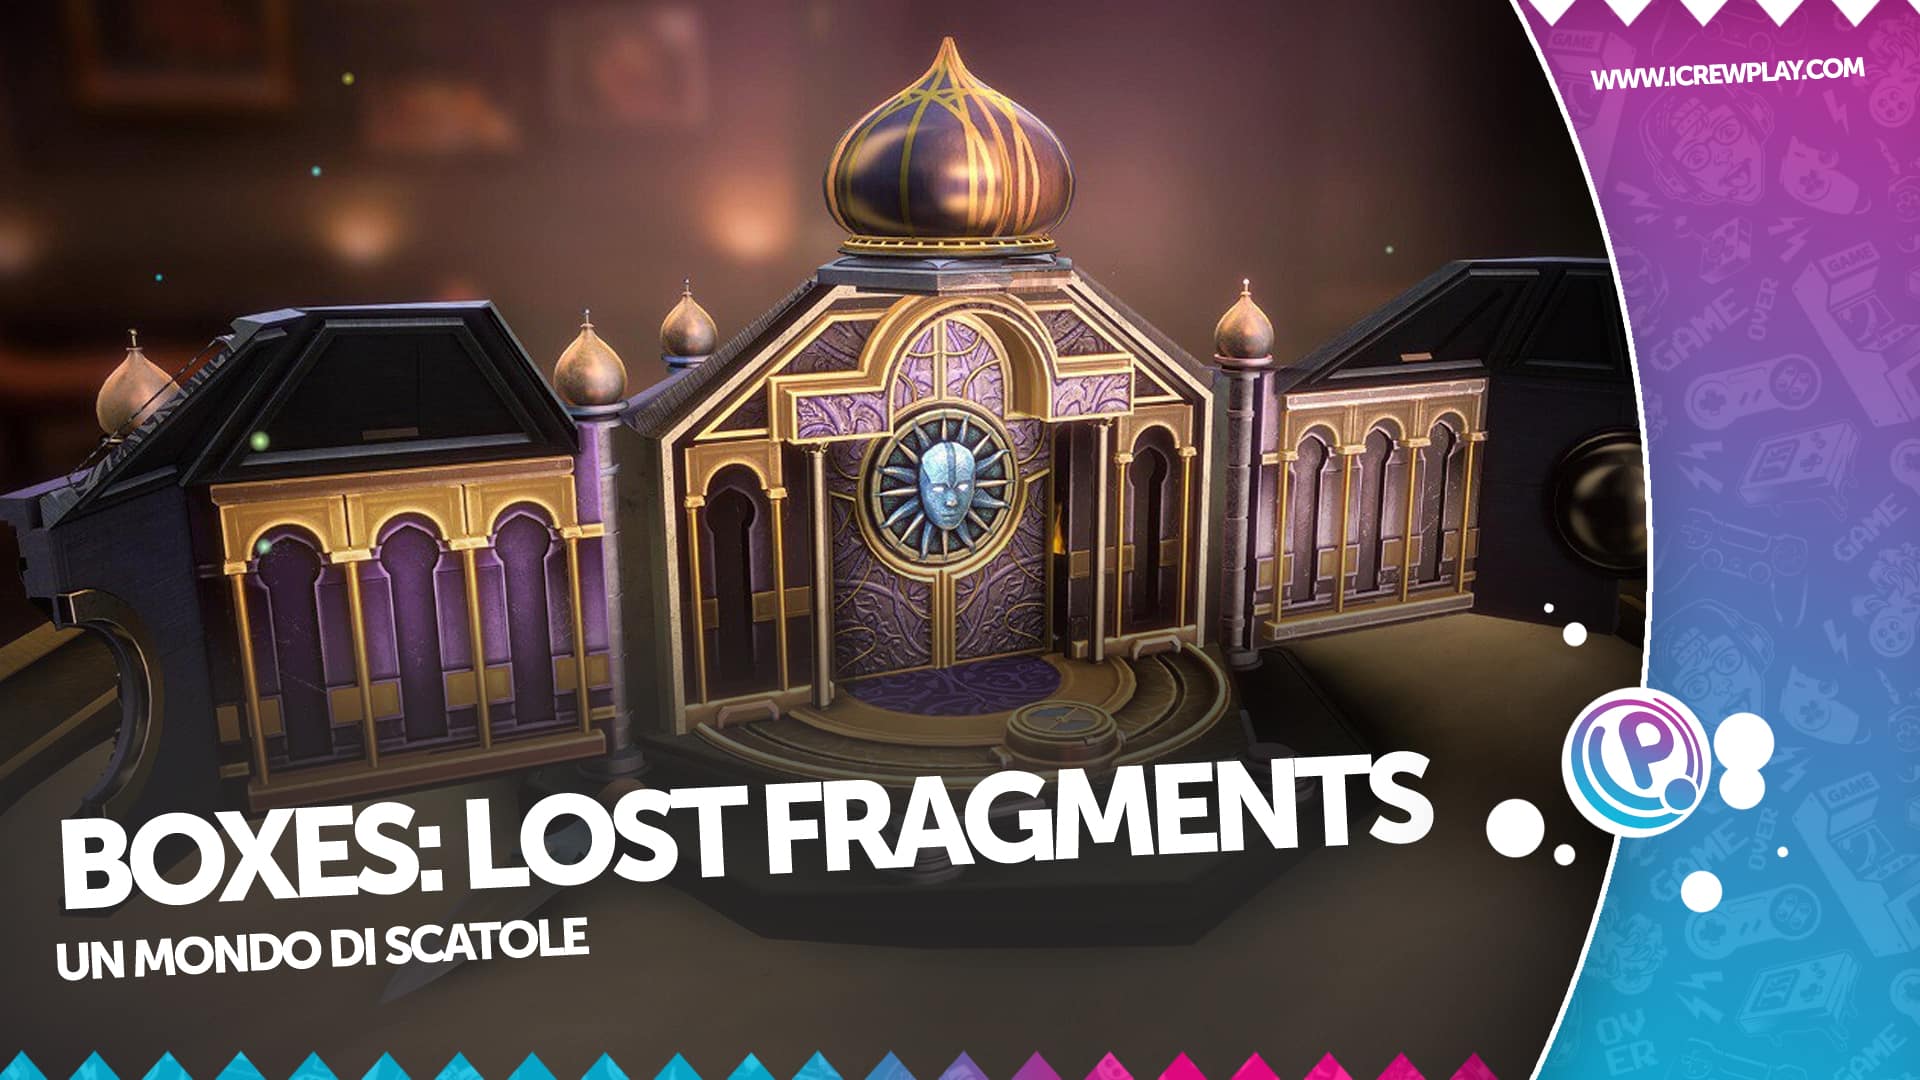 the lost fragments